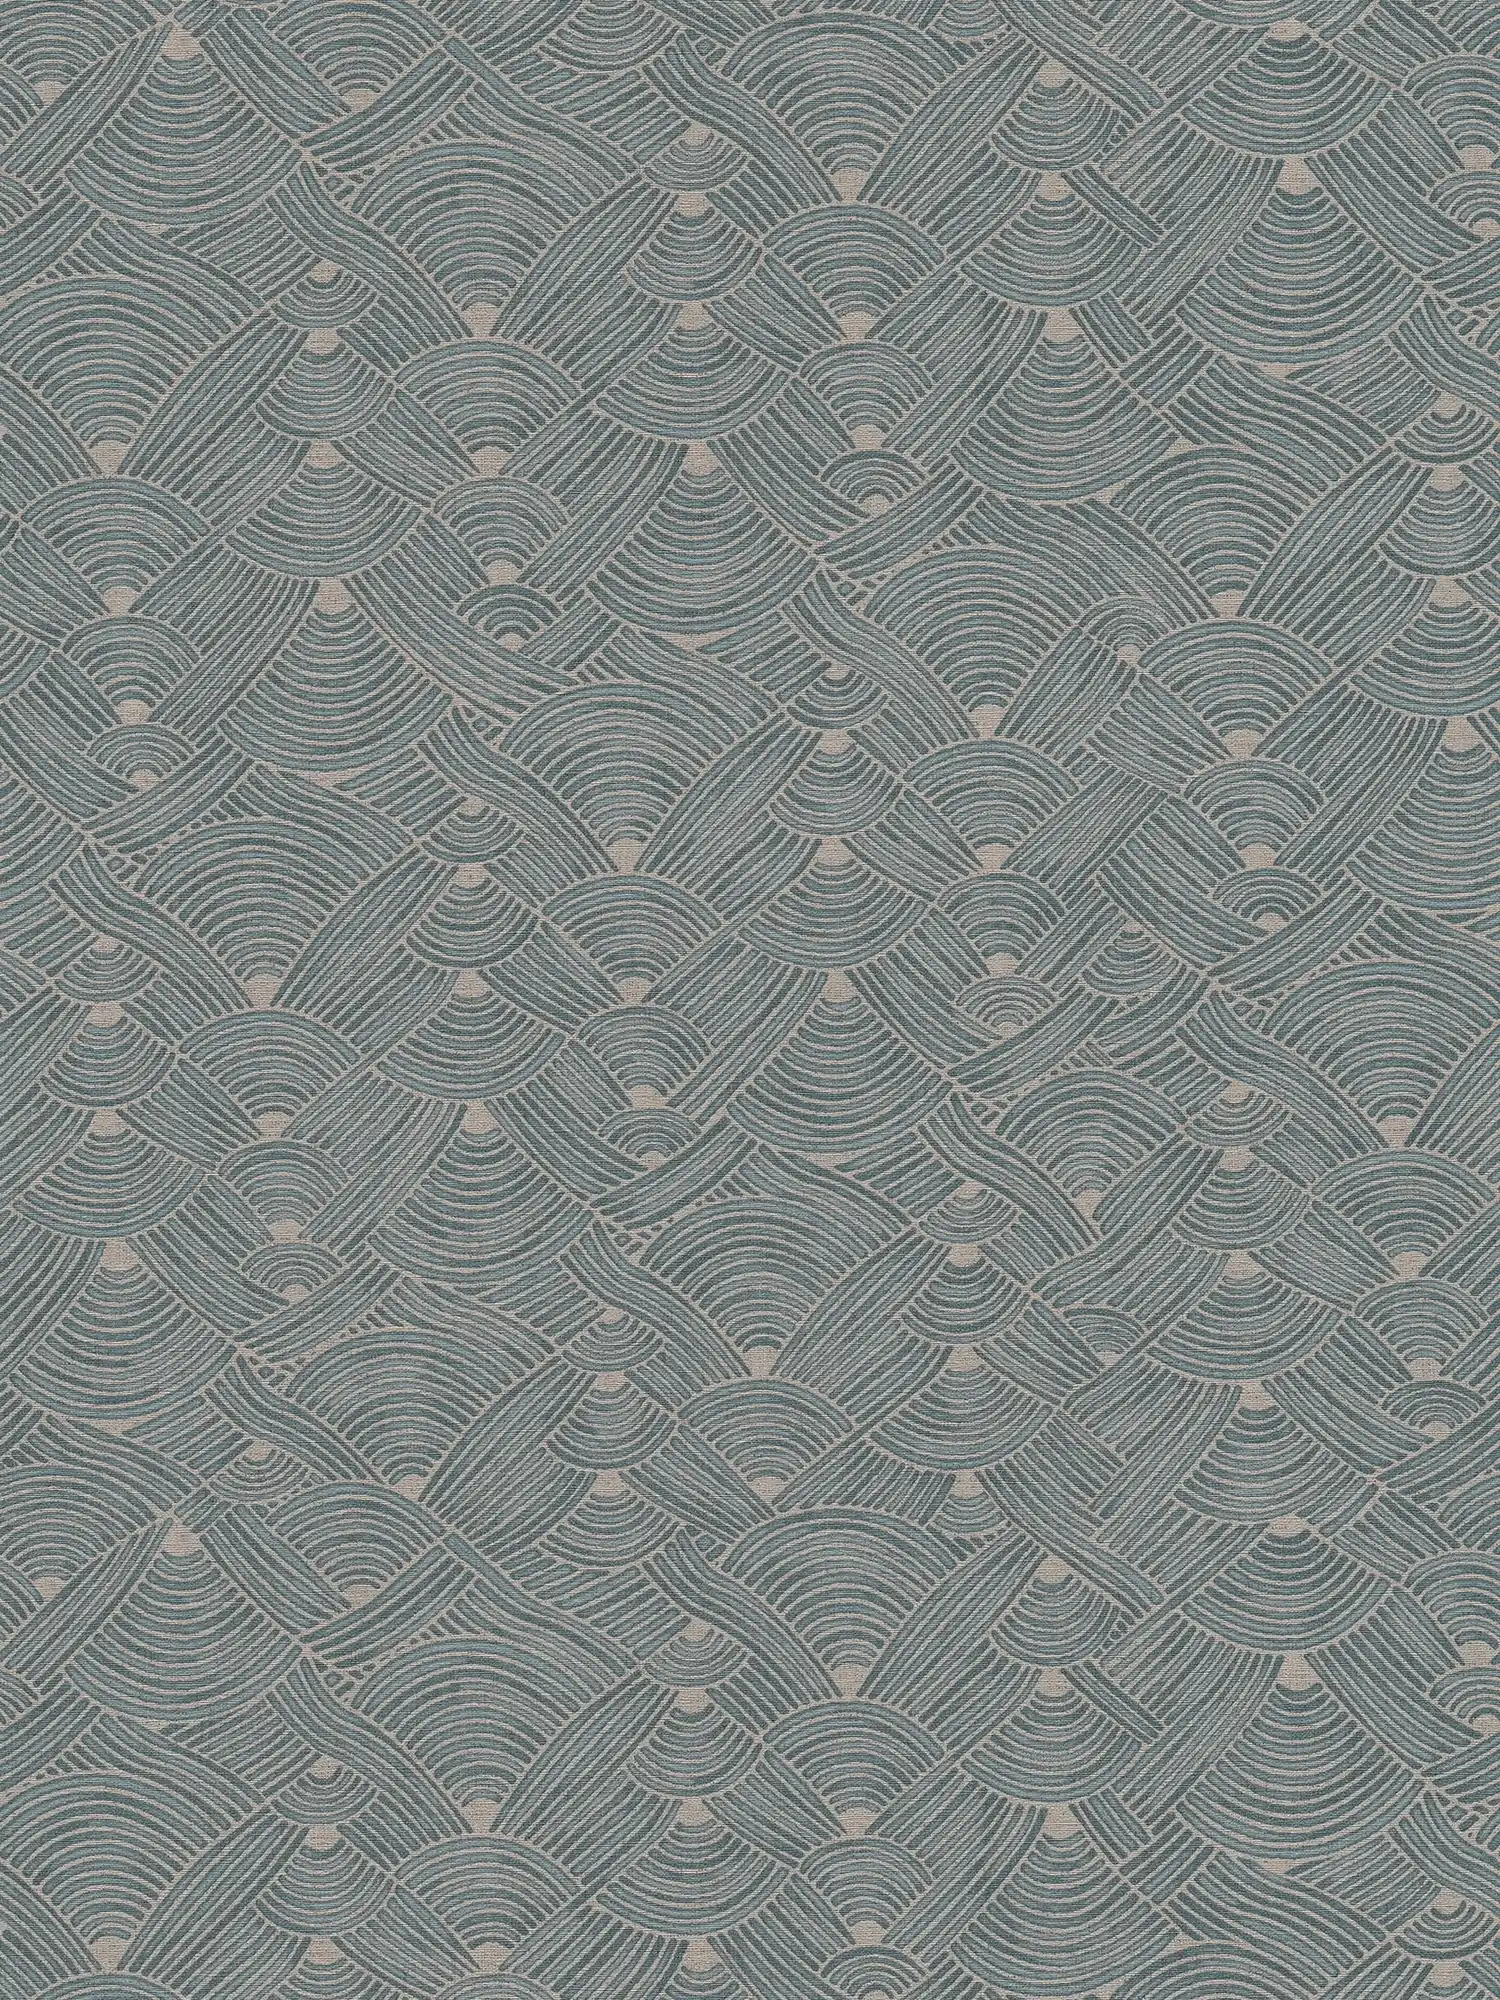 Non-woven wallpaper ethno design with basket look - blue, grey, beige
